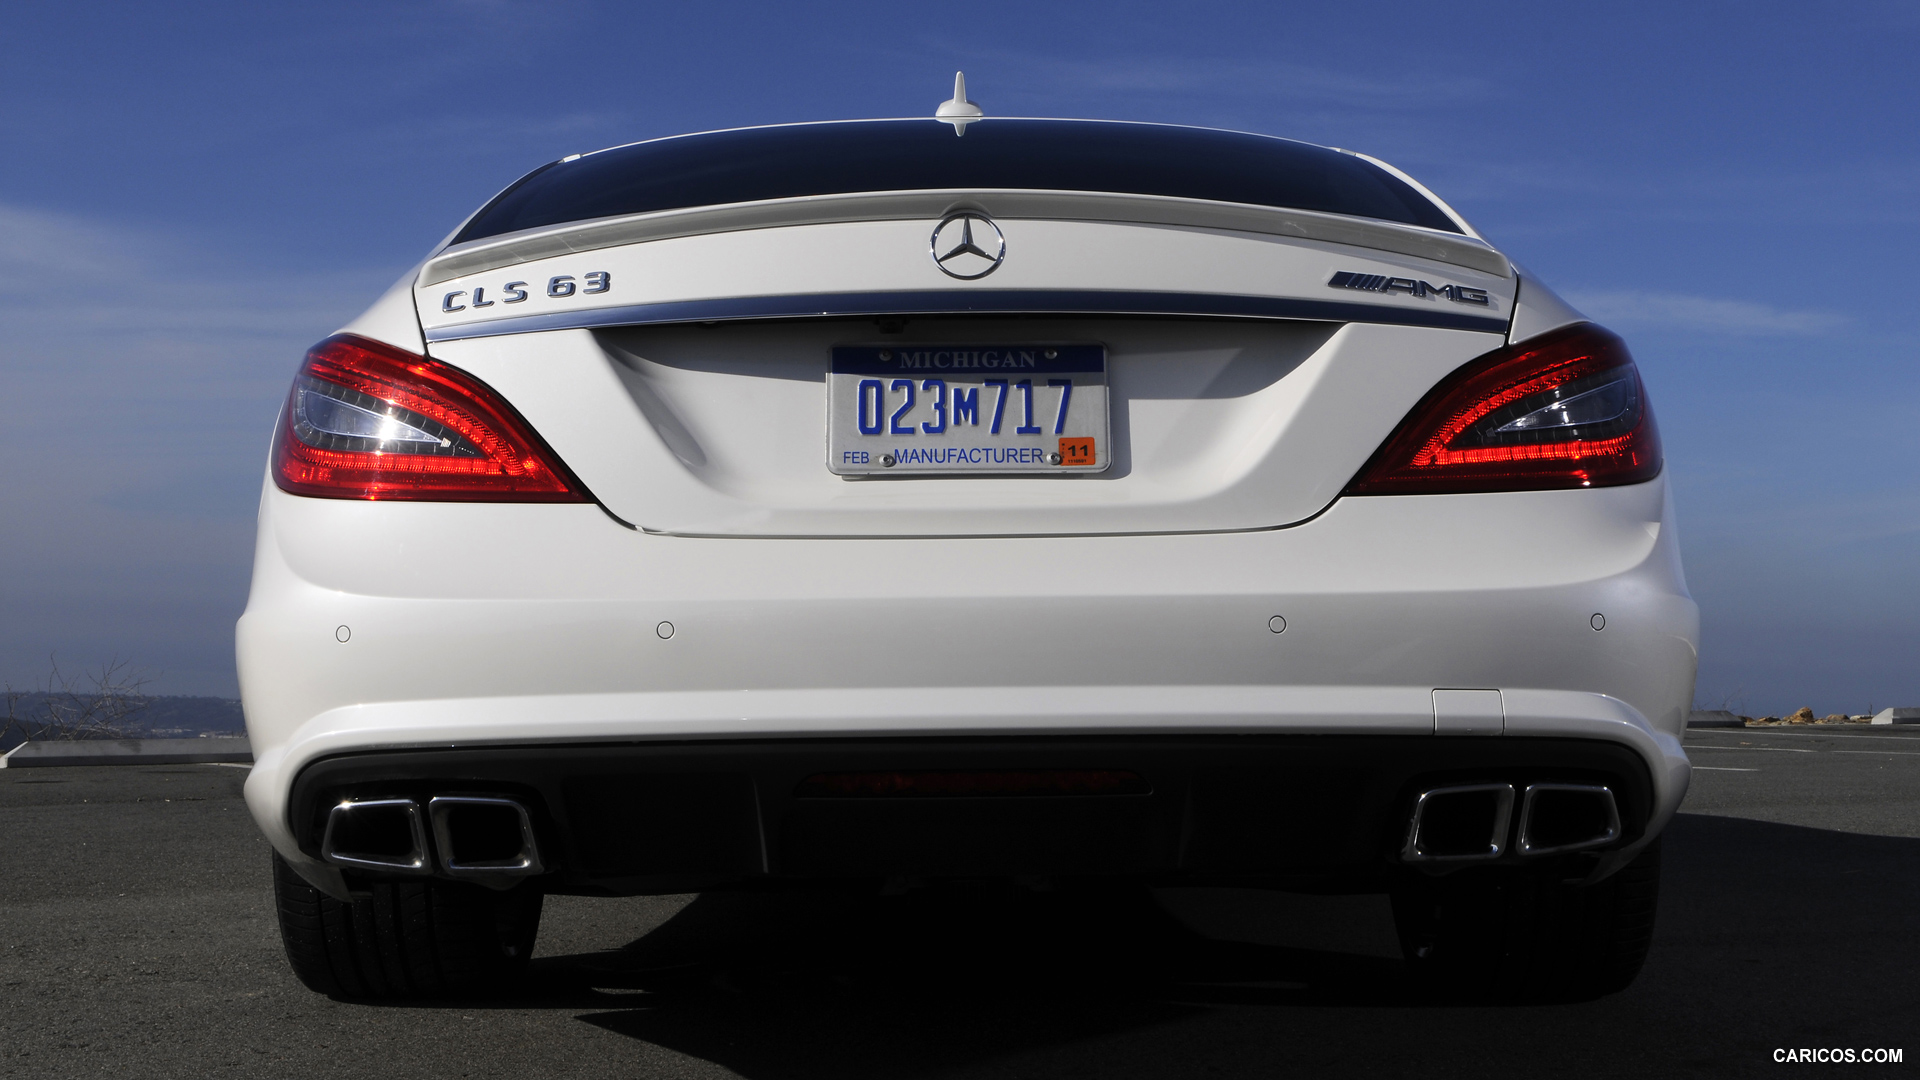 Mercedes-Benz CLS63 AMG (2012) US-Version - Diamond White - Rear , #30 of 100